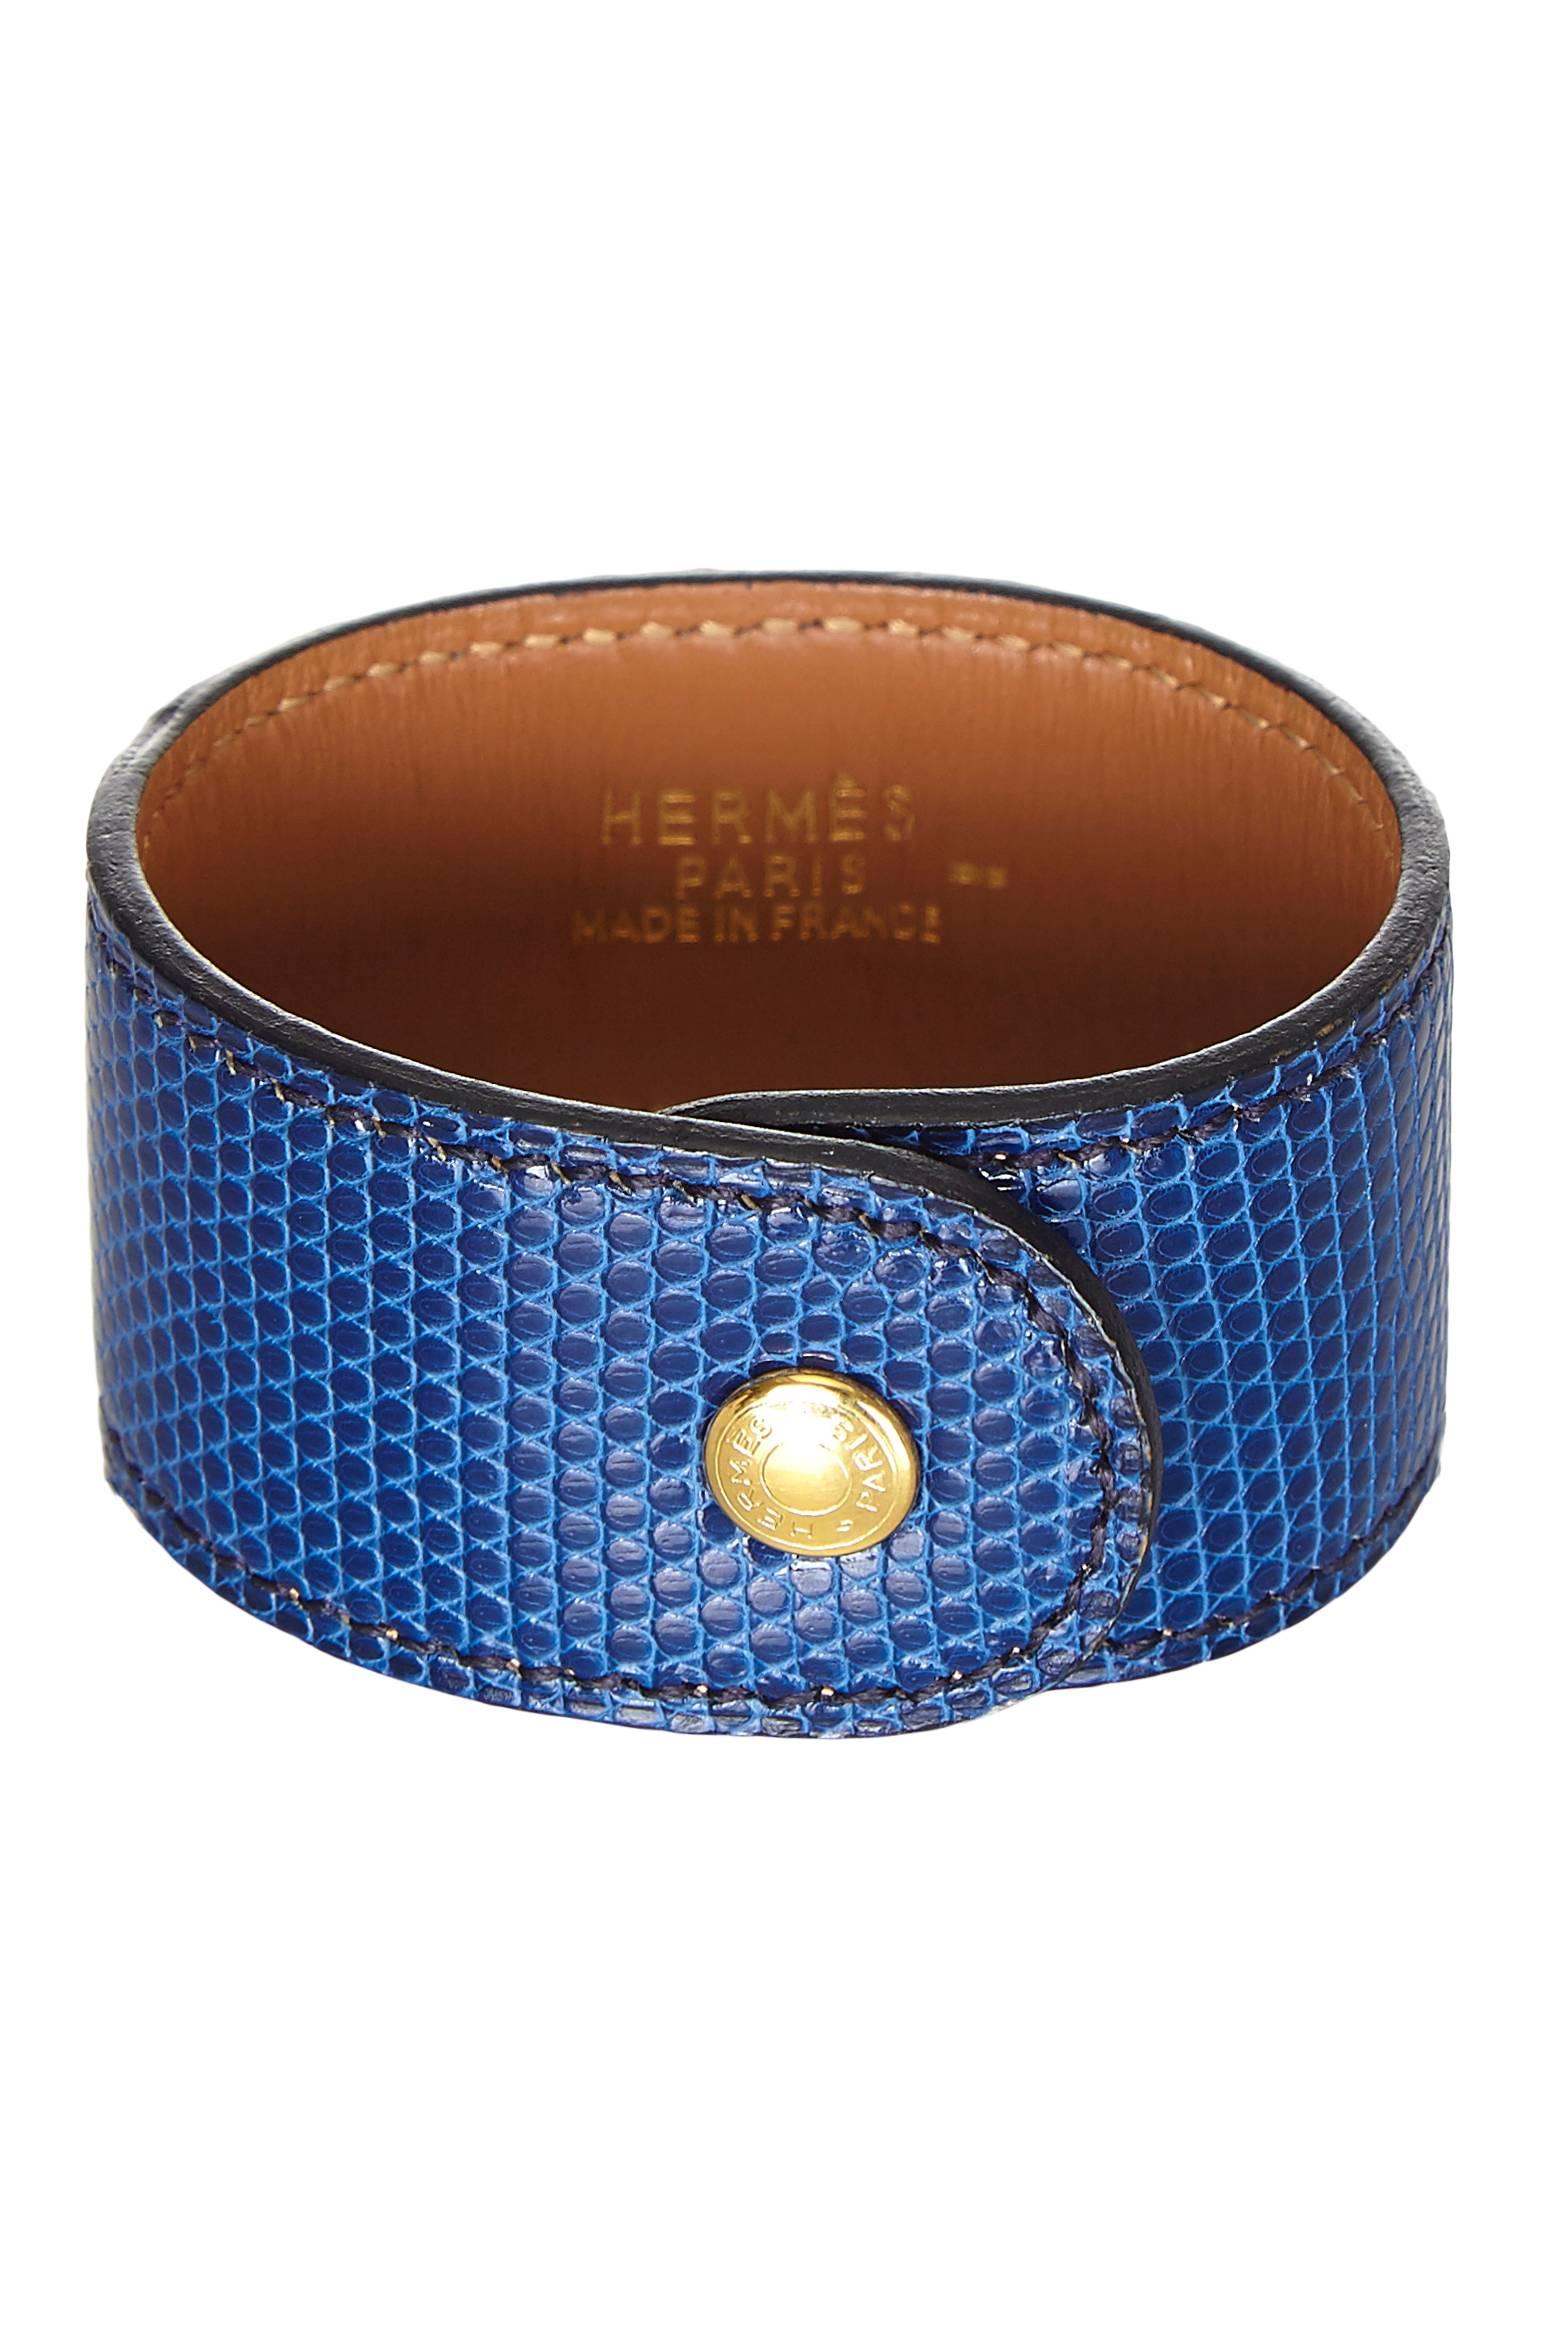 Hermes Medor bracelet in bright blue lizard leather with gold tone medor medallion stud and snap clasp fastening. Is in excellent used condition and comes with original box.

Total Length: 19cm/ 7.5"
When Fastened: 15.5cm/ 6"
Width: 3cm/